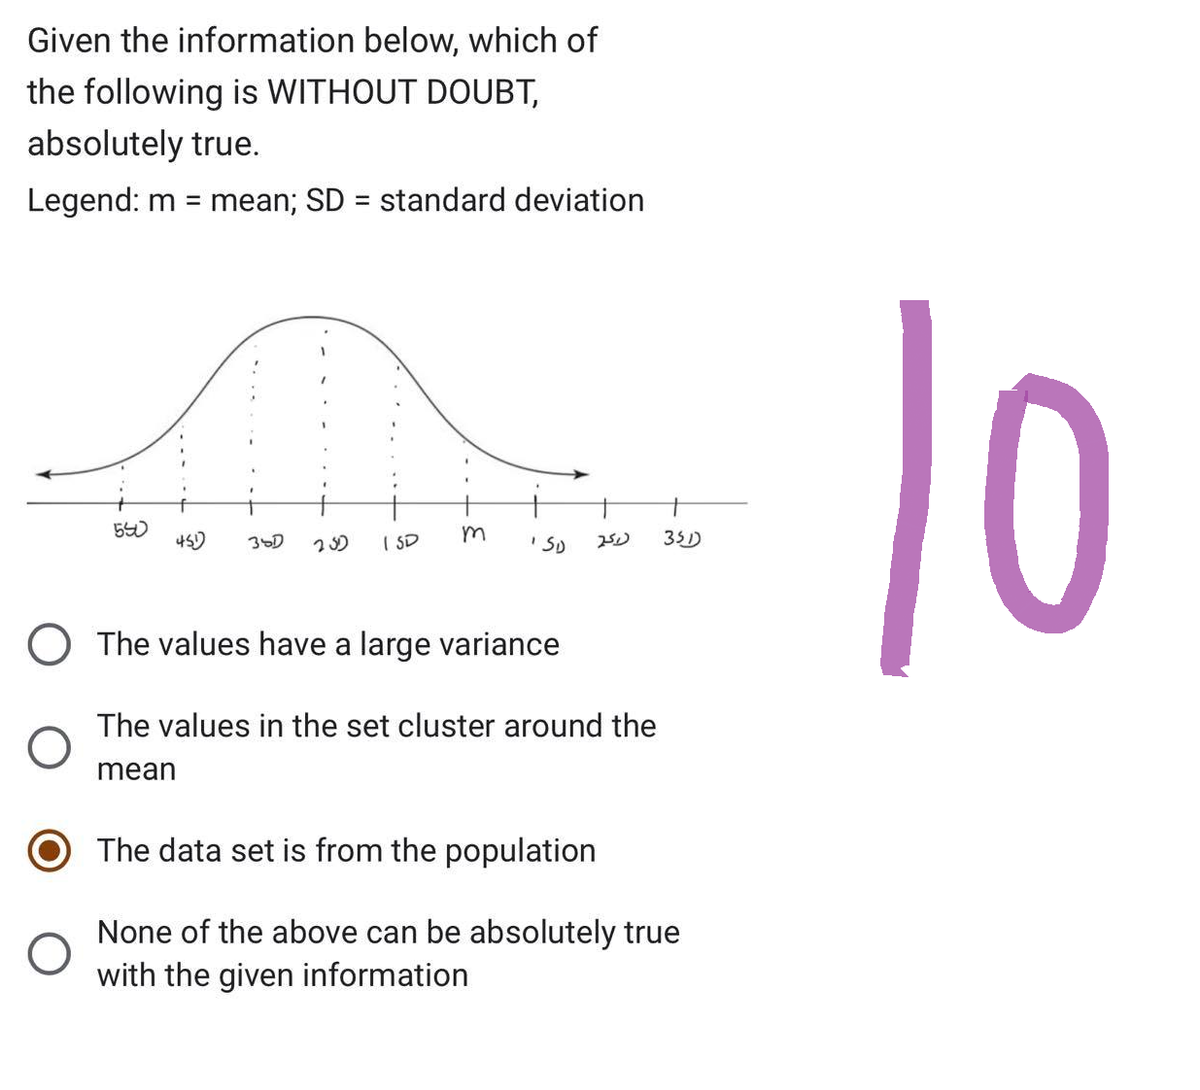 Given the information below, which of
the following is WITHOUT DOUBT,
absolutely true.
Legend: m = mean; SD = standard deviation
550
O
451)
38D 250 ISD
m
ISD 251) 351)
O The values have a large variance
The values in the set cluster around the
mean
Th data set is fro the population
None of the above can be absolutely true
with the given information
10